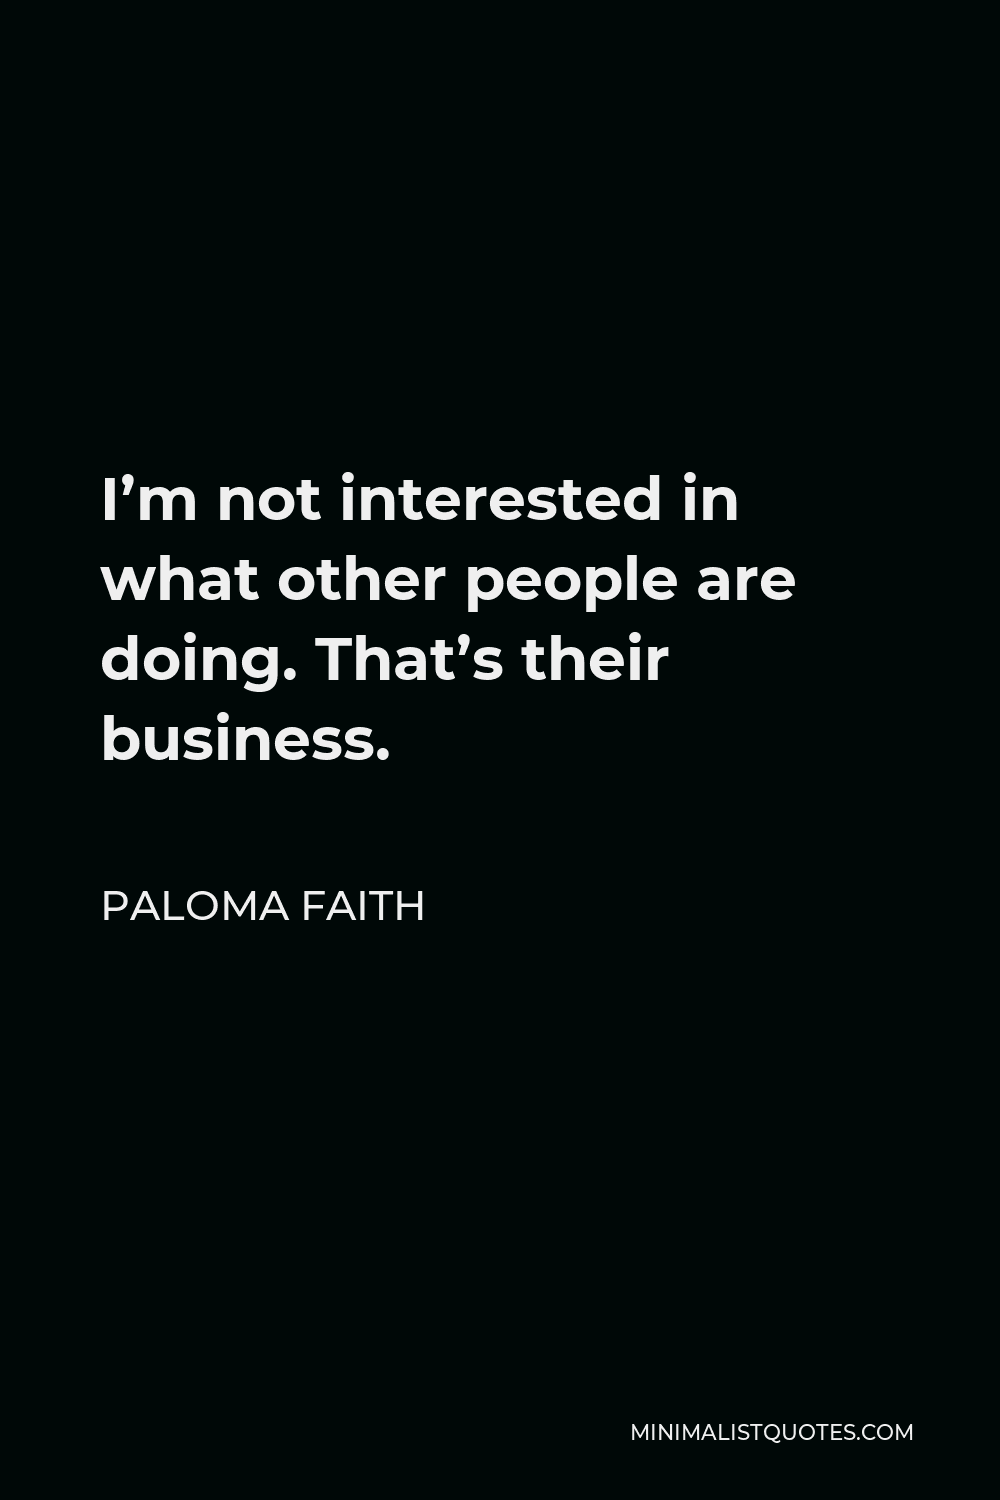 Paloma Faith Quote - I’m not interested in what other people are doing. That’s their business.